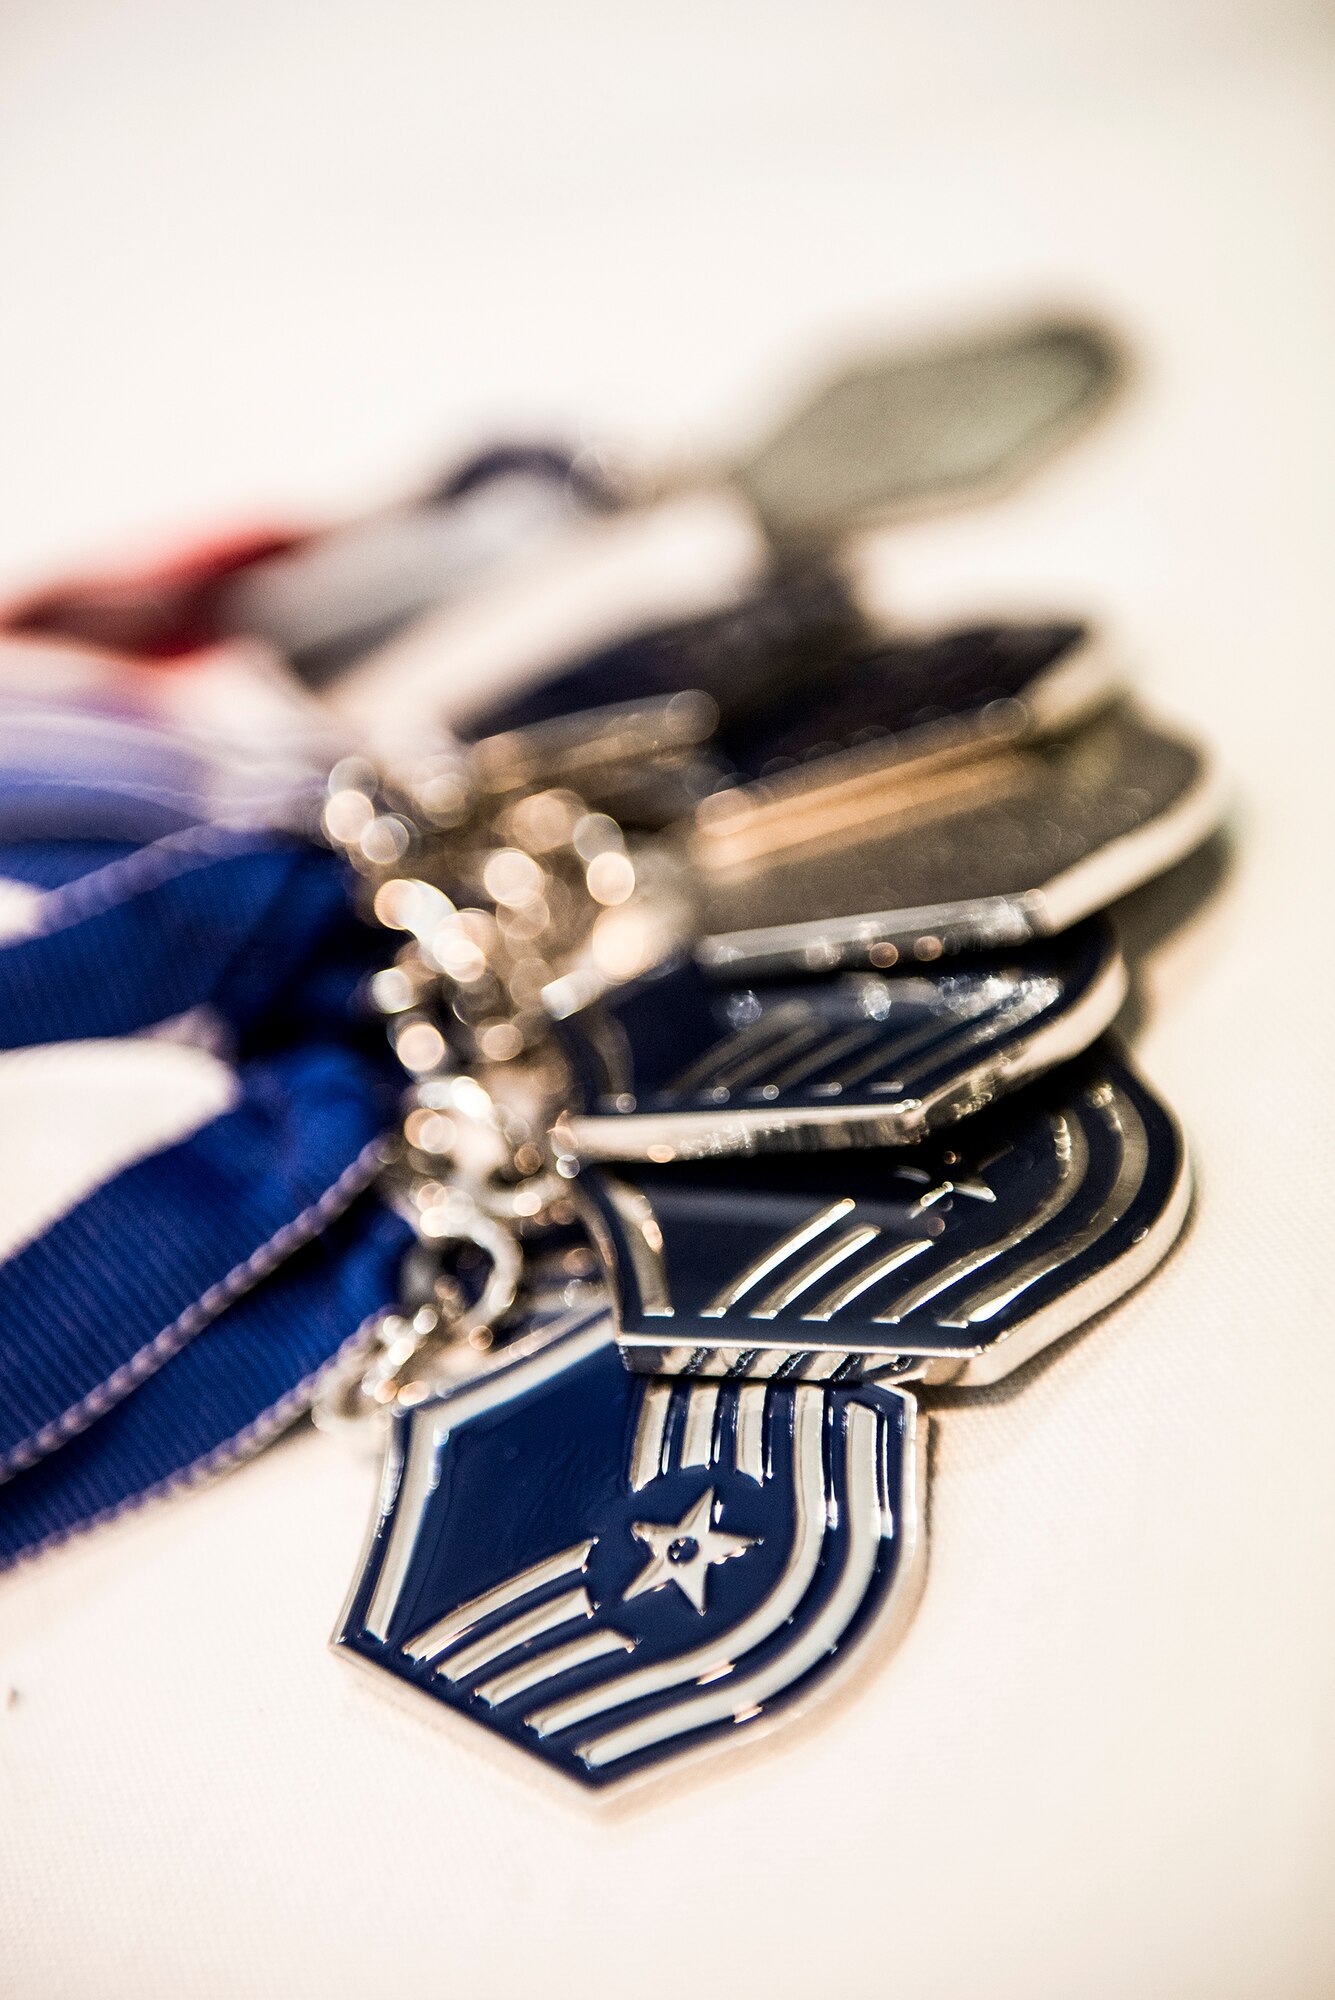 Master sergeant medals rest on a table during a Senior NCO induction ceremony at Moody Air Force Base, Ga., July 25, 2014. Prior to the ceremony, the inductees were given a master sergeant medal to wear. (U.S. Air Force photo by Airman 1st Class Ceaira Tinsley/Released)